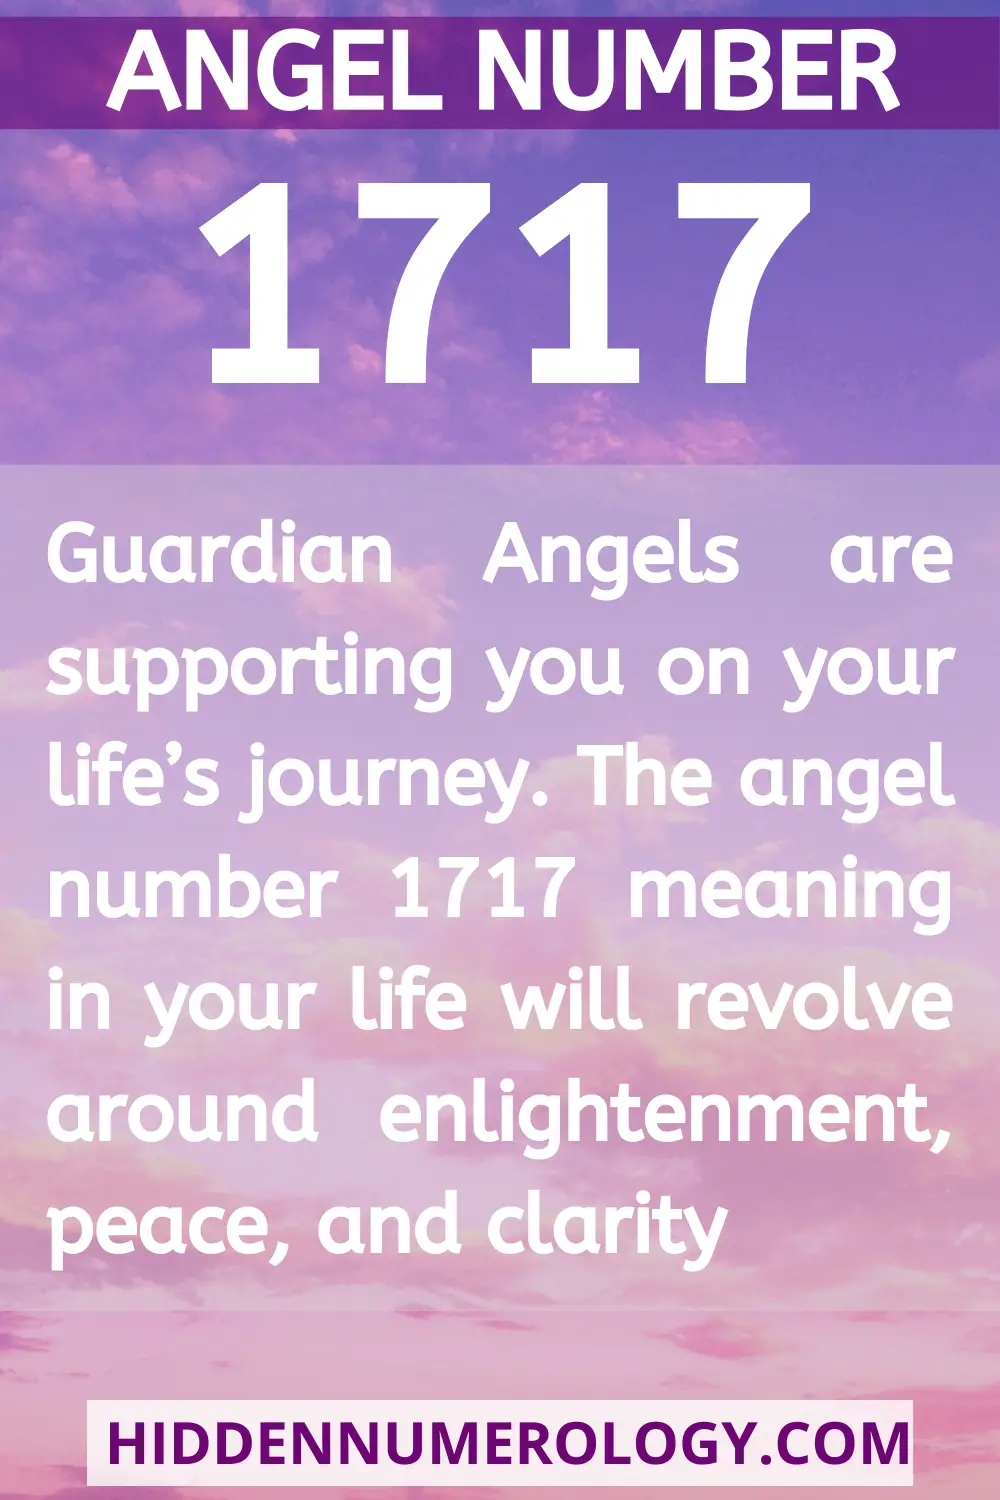 What Is Angel Number 1717?